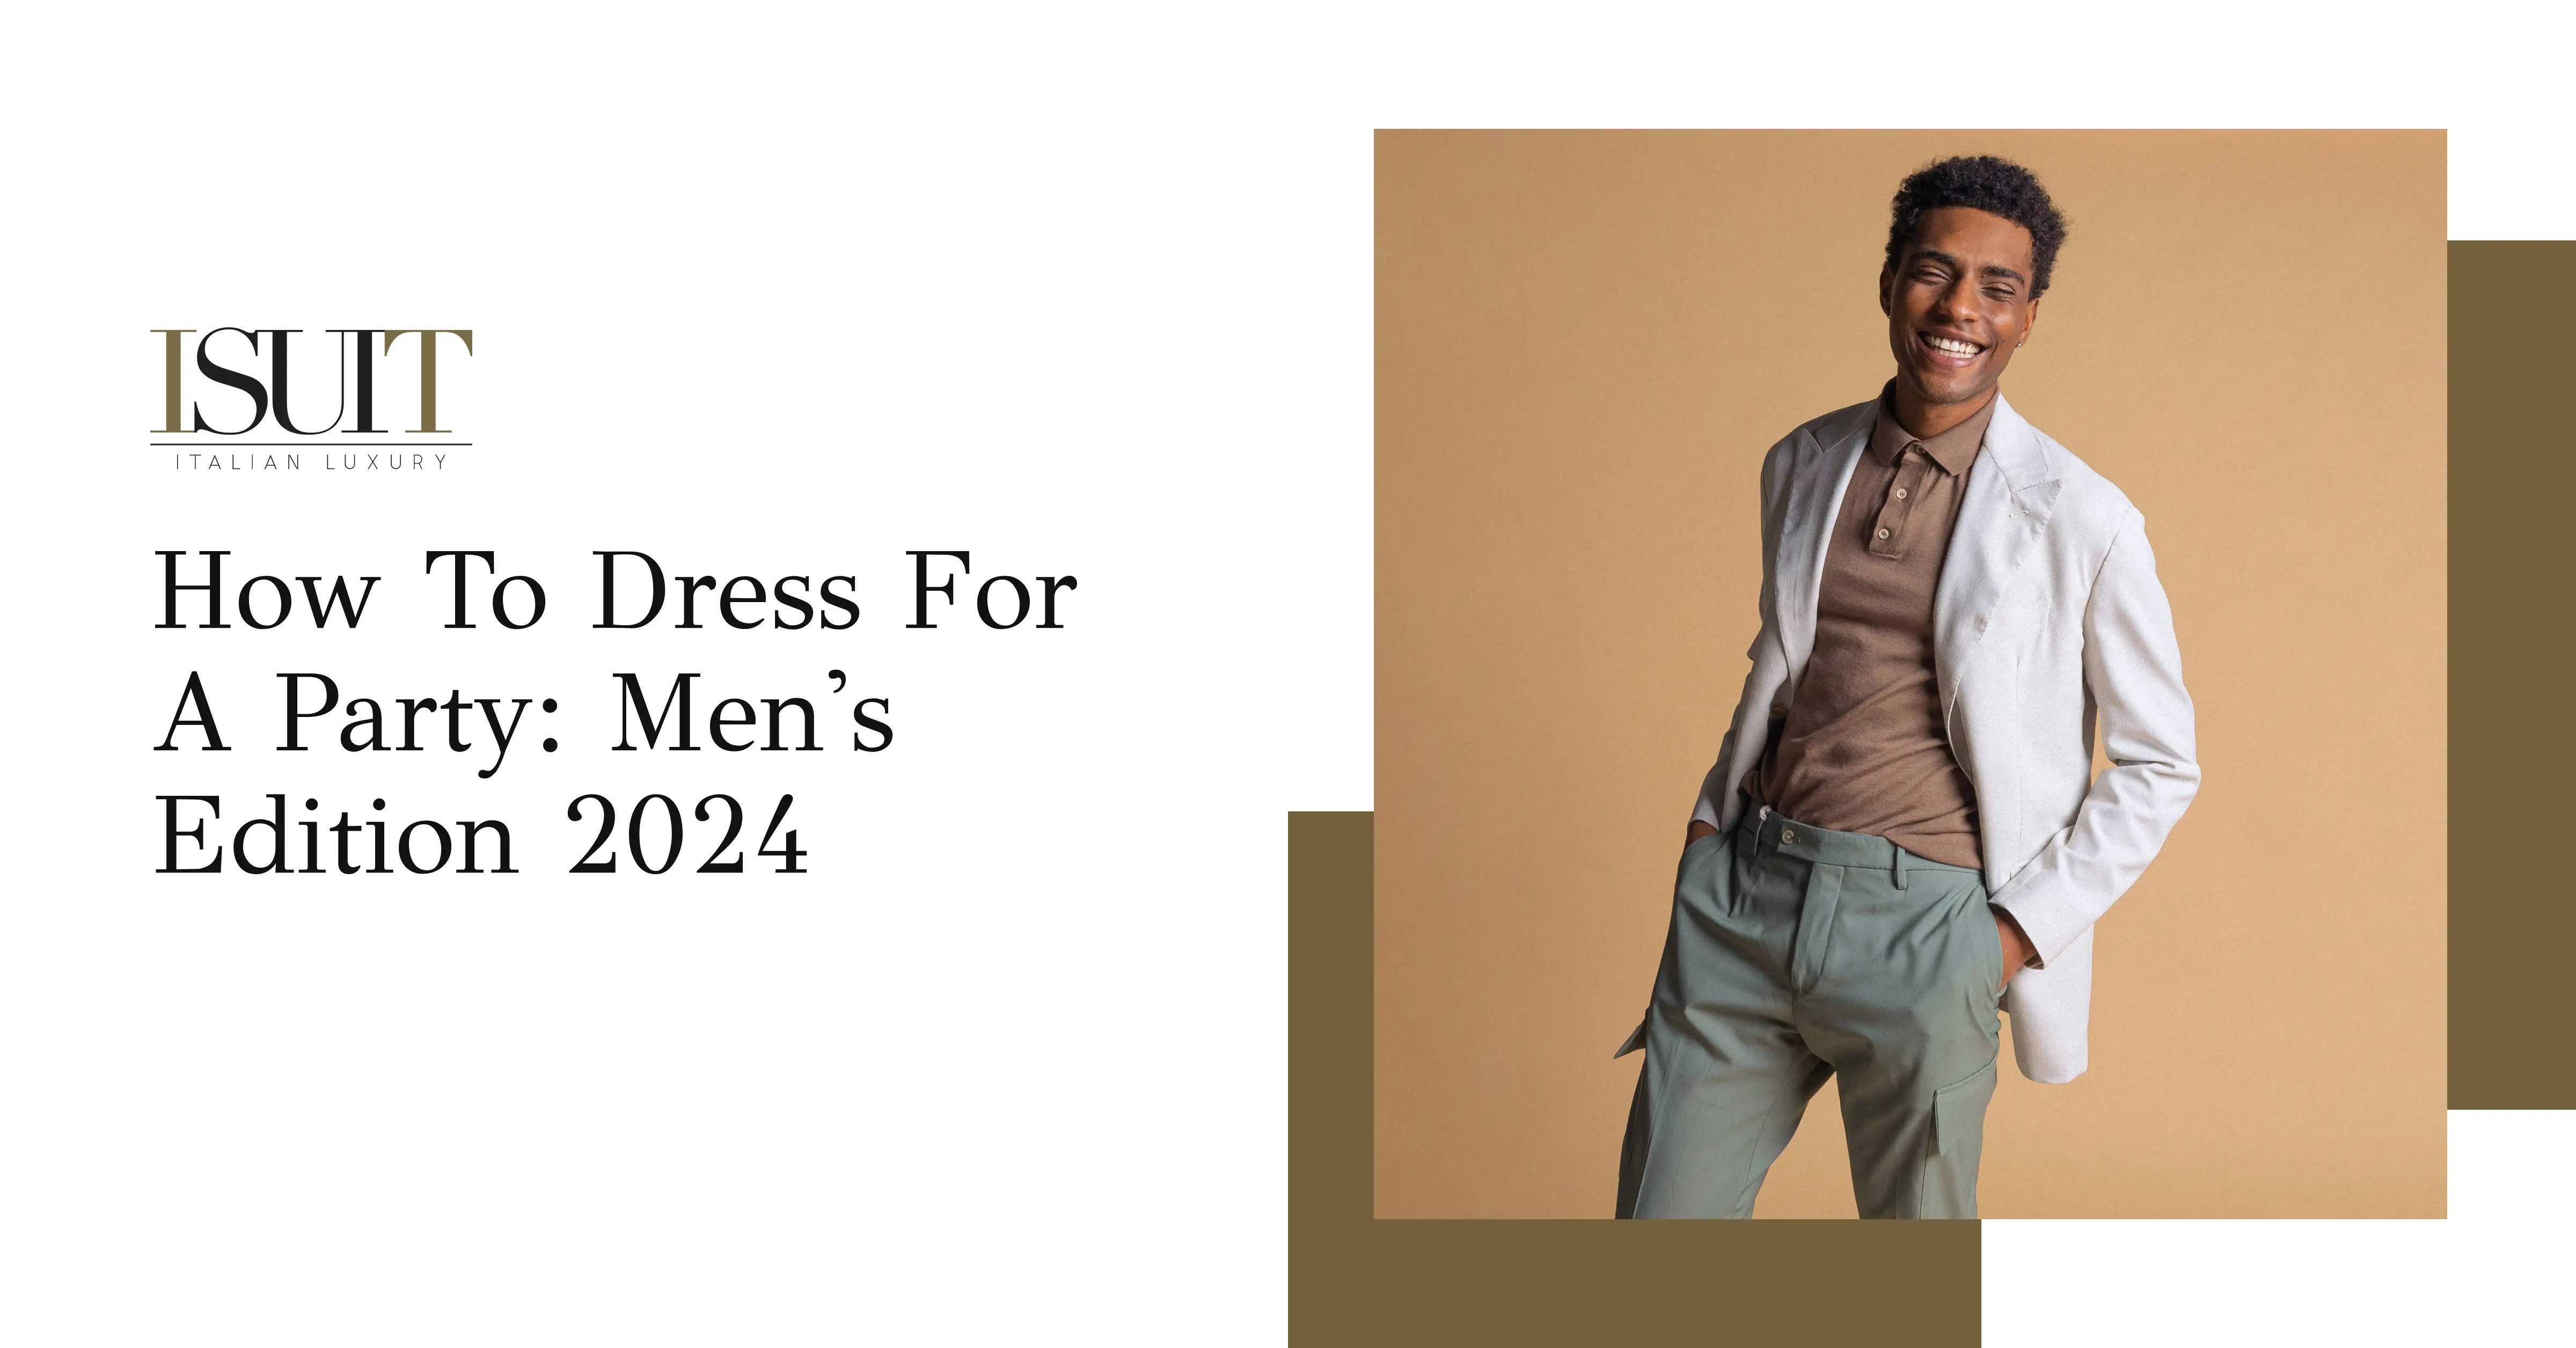 How To Dress For A Party: Men's Edition 2024